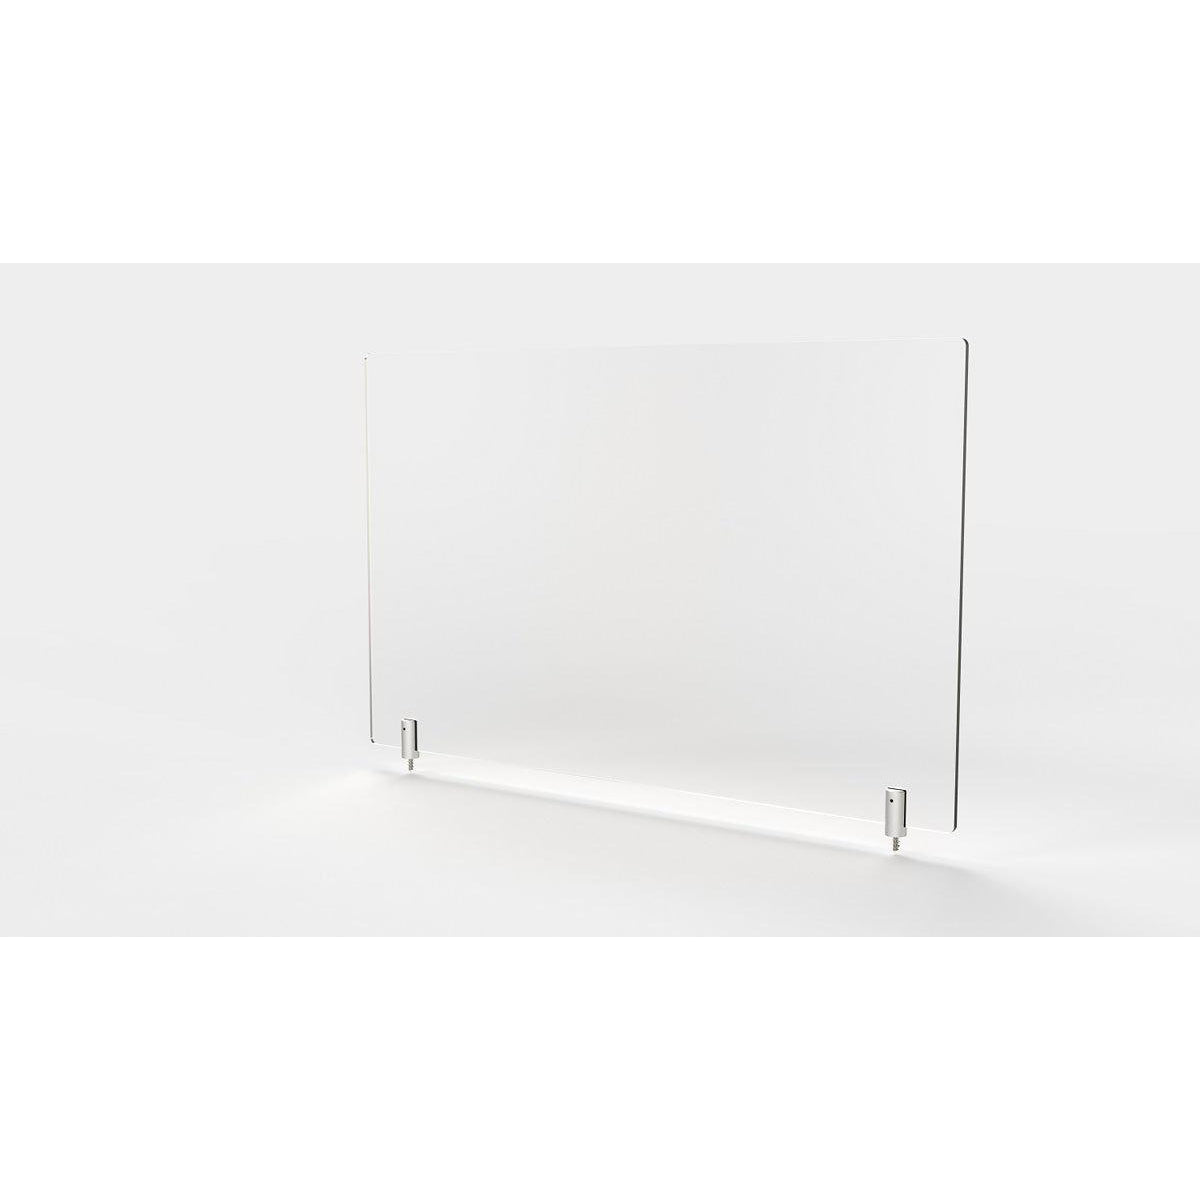 Frosted Thermoplastic Partition & Cubicle Extender with Permanent Screw Attachment, 30"H x 24"W